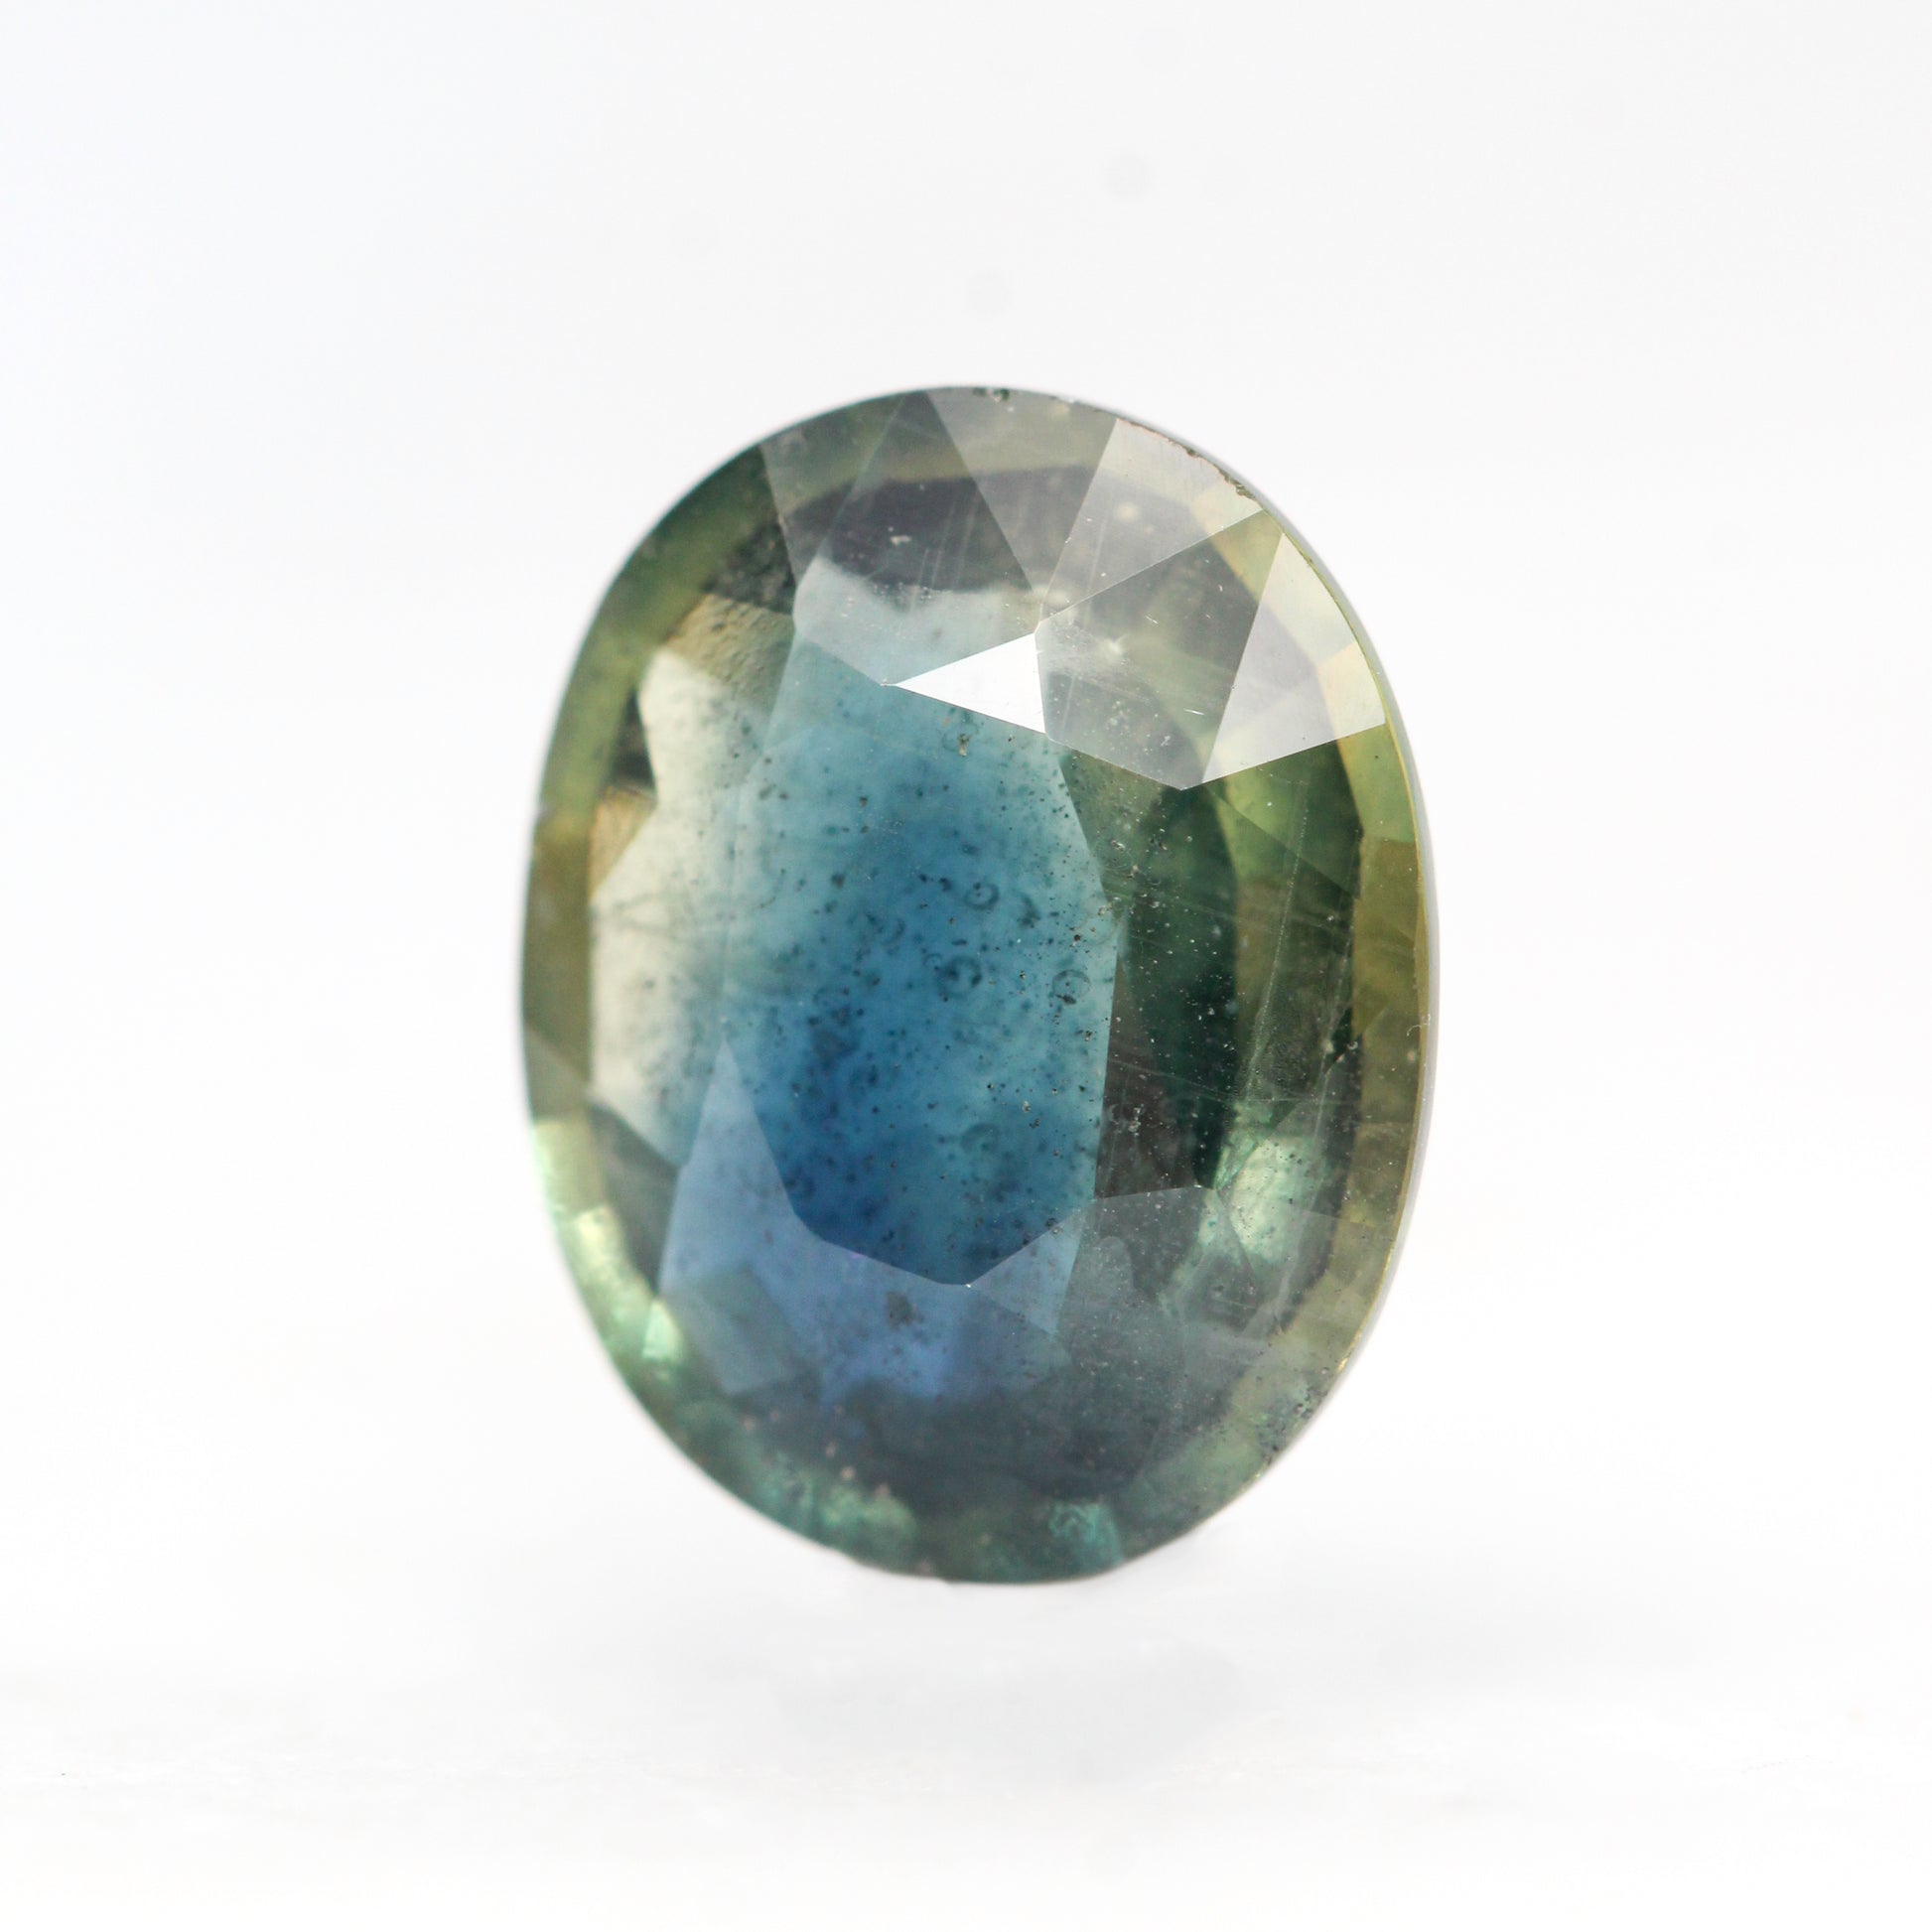 3.47 Carat Blue-Green Oval Sapphire for Custom Work - Inventory Code MCOS347 - Midwinter Co. Alternative Bridal Rings and Modern Fine Jewelry